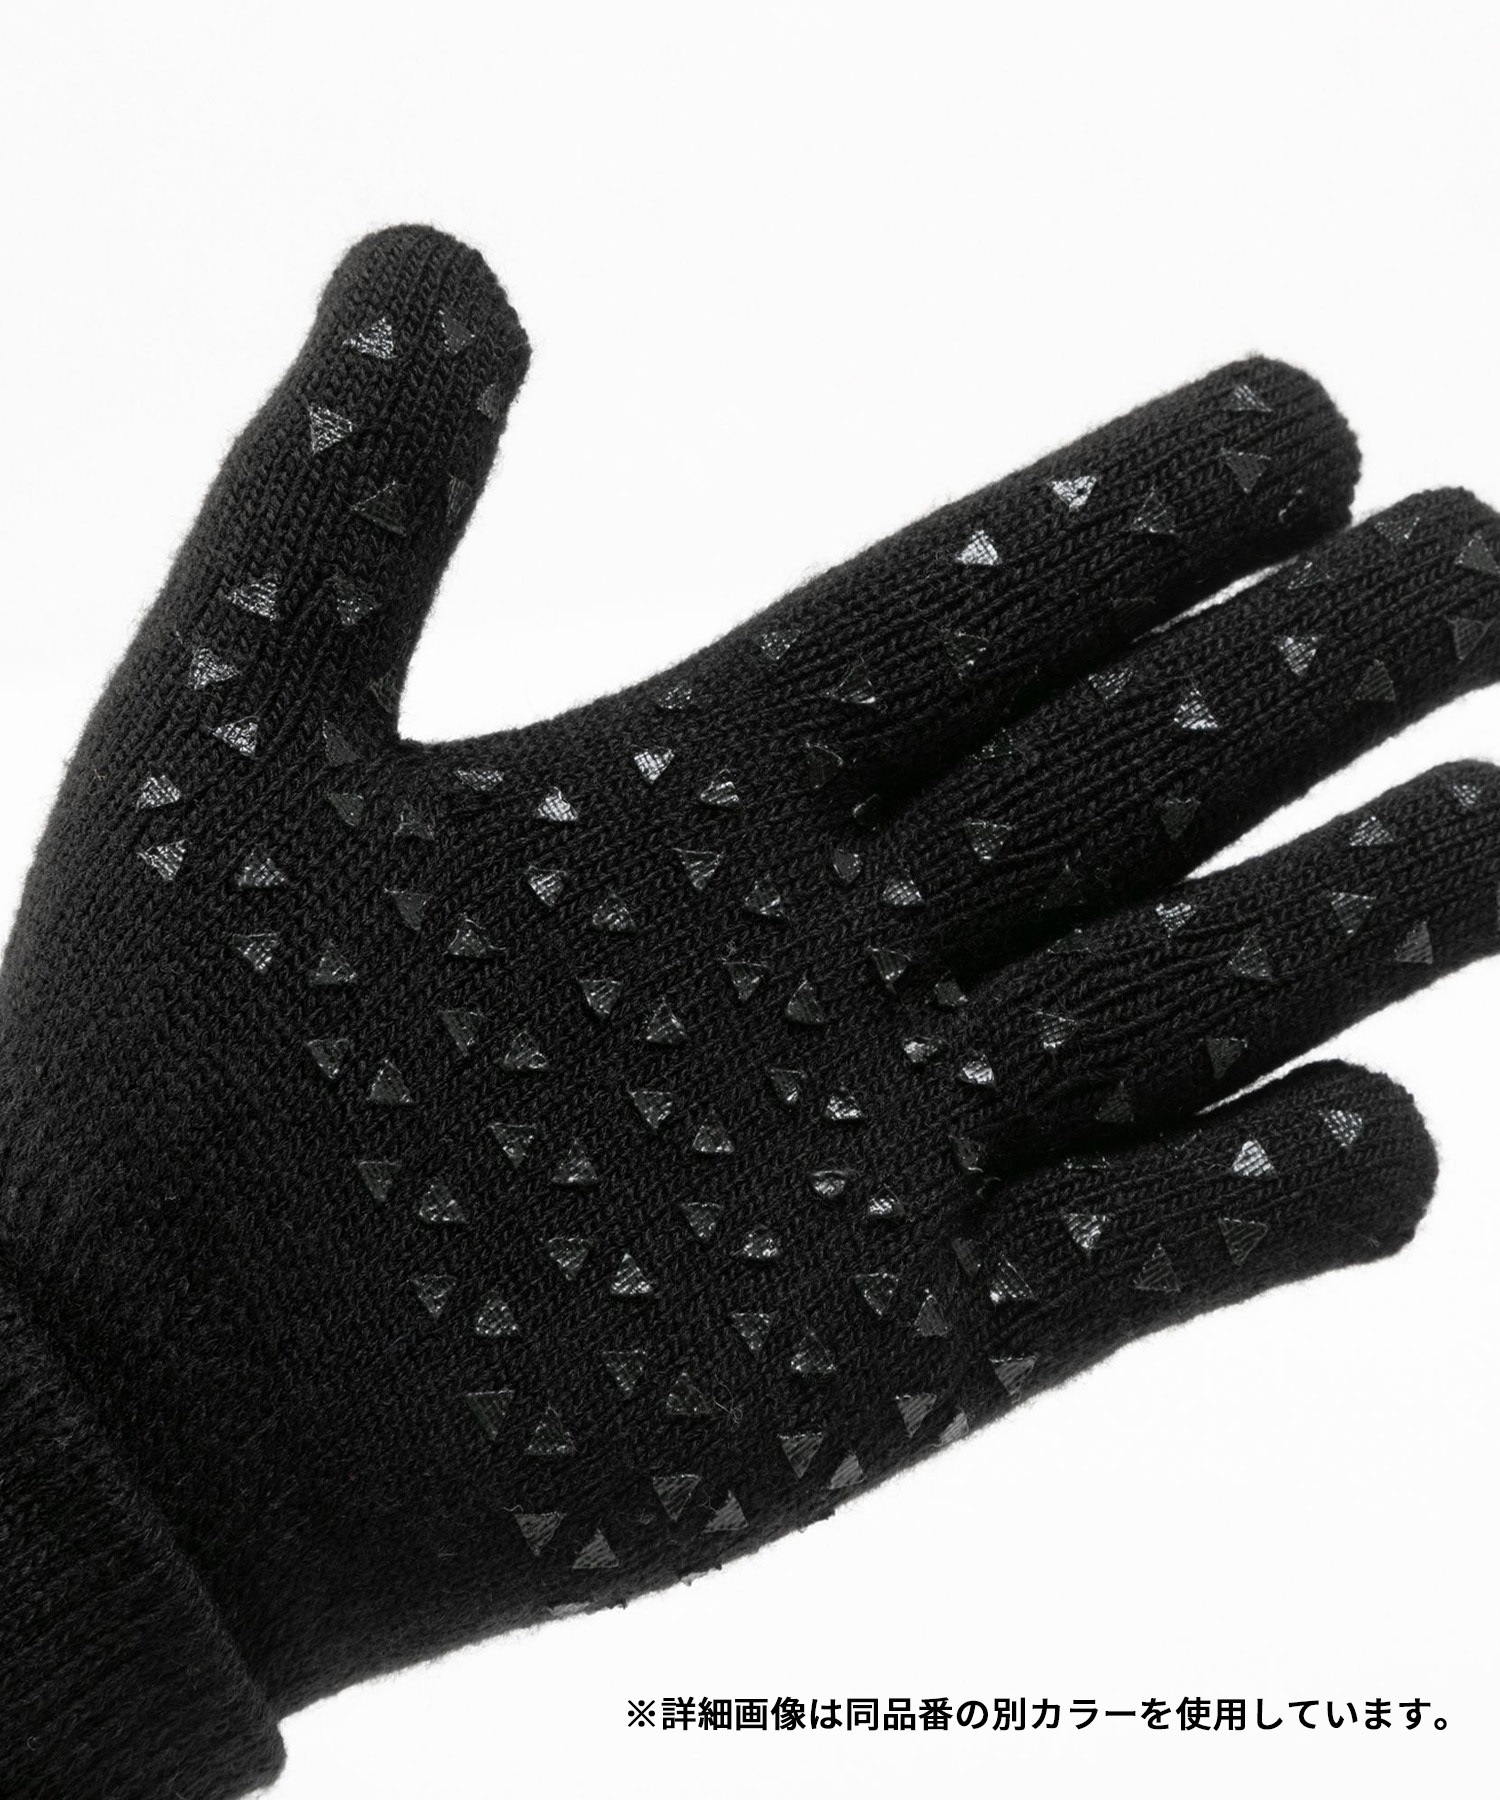 THE NORTH FACE/ザ・ノース・フェイス Kids’ Knit Glove ニットグローブ キッズ 手袋 オーキッドピンク NNJ62200 OP(OP-FREE)